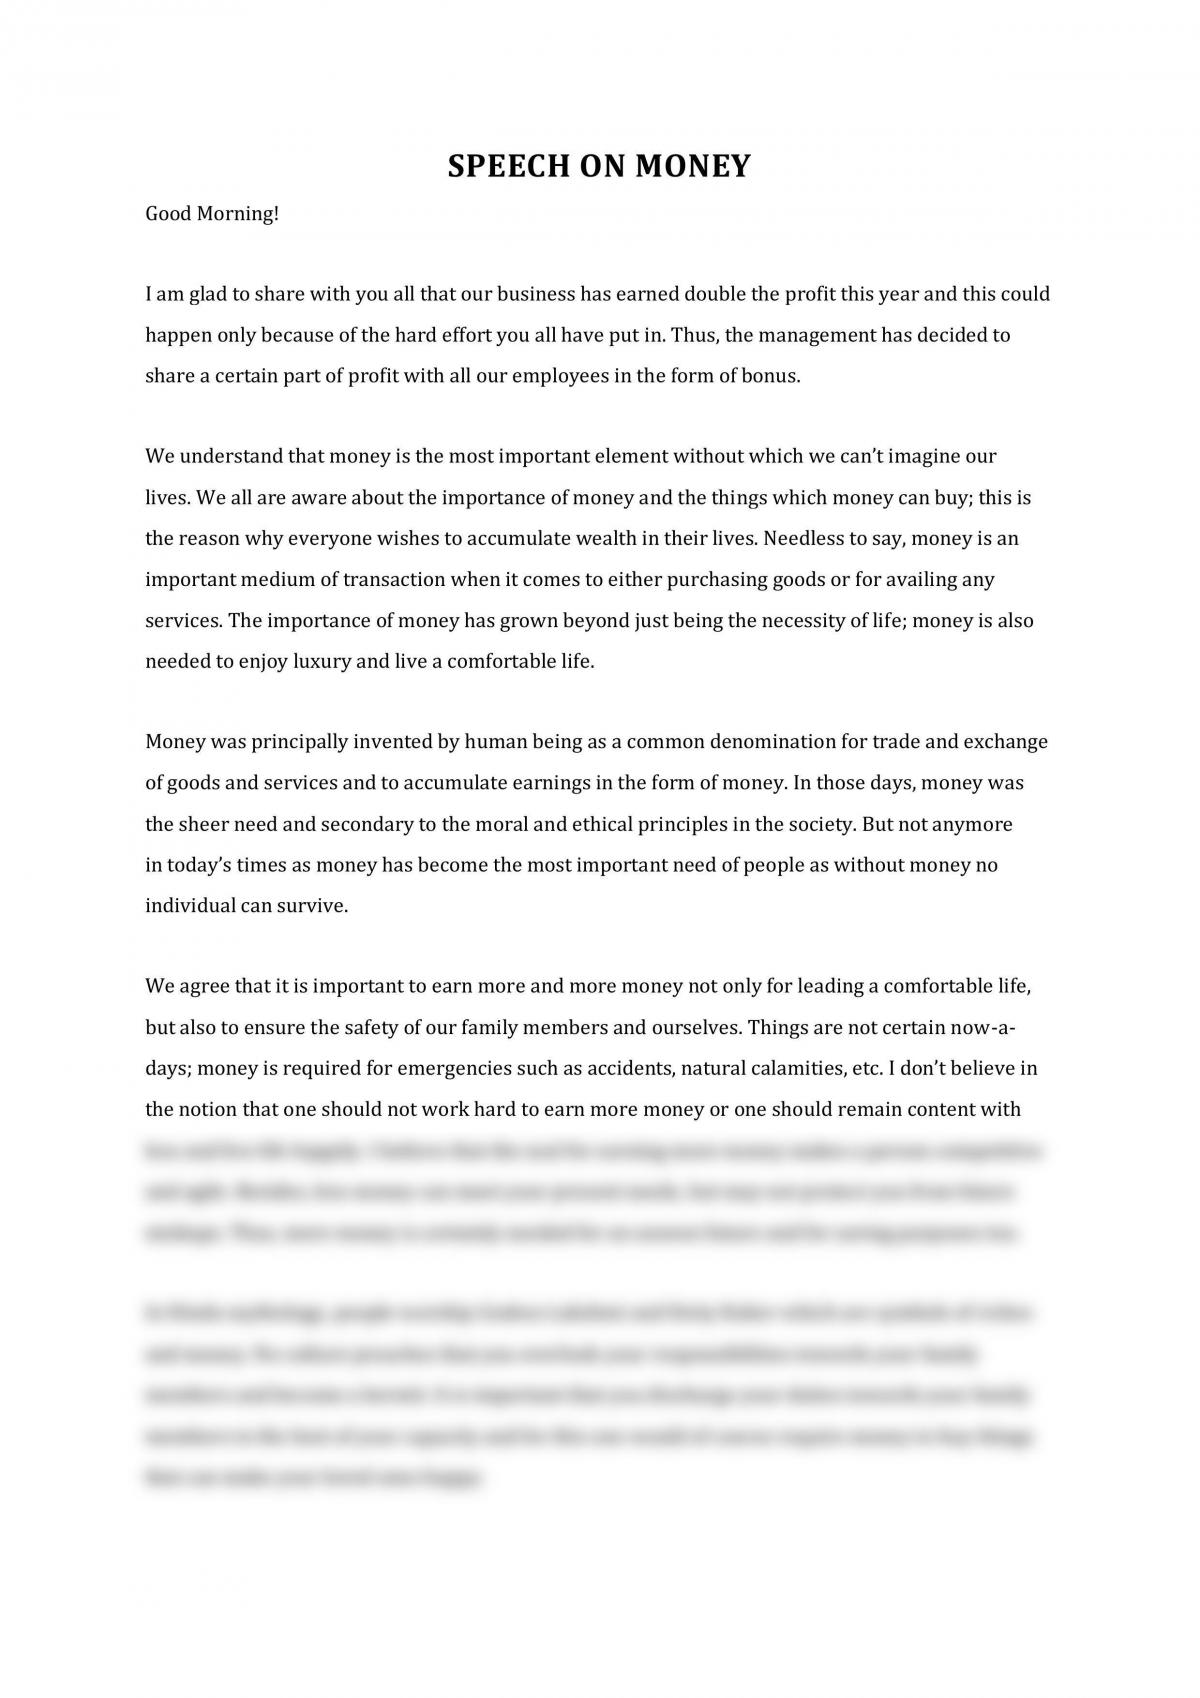 essay about making money